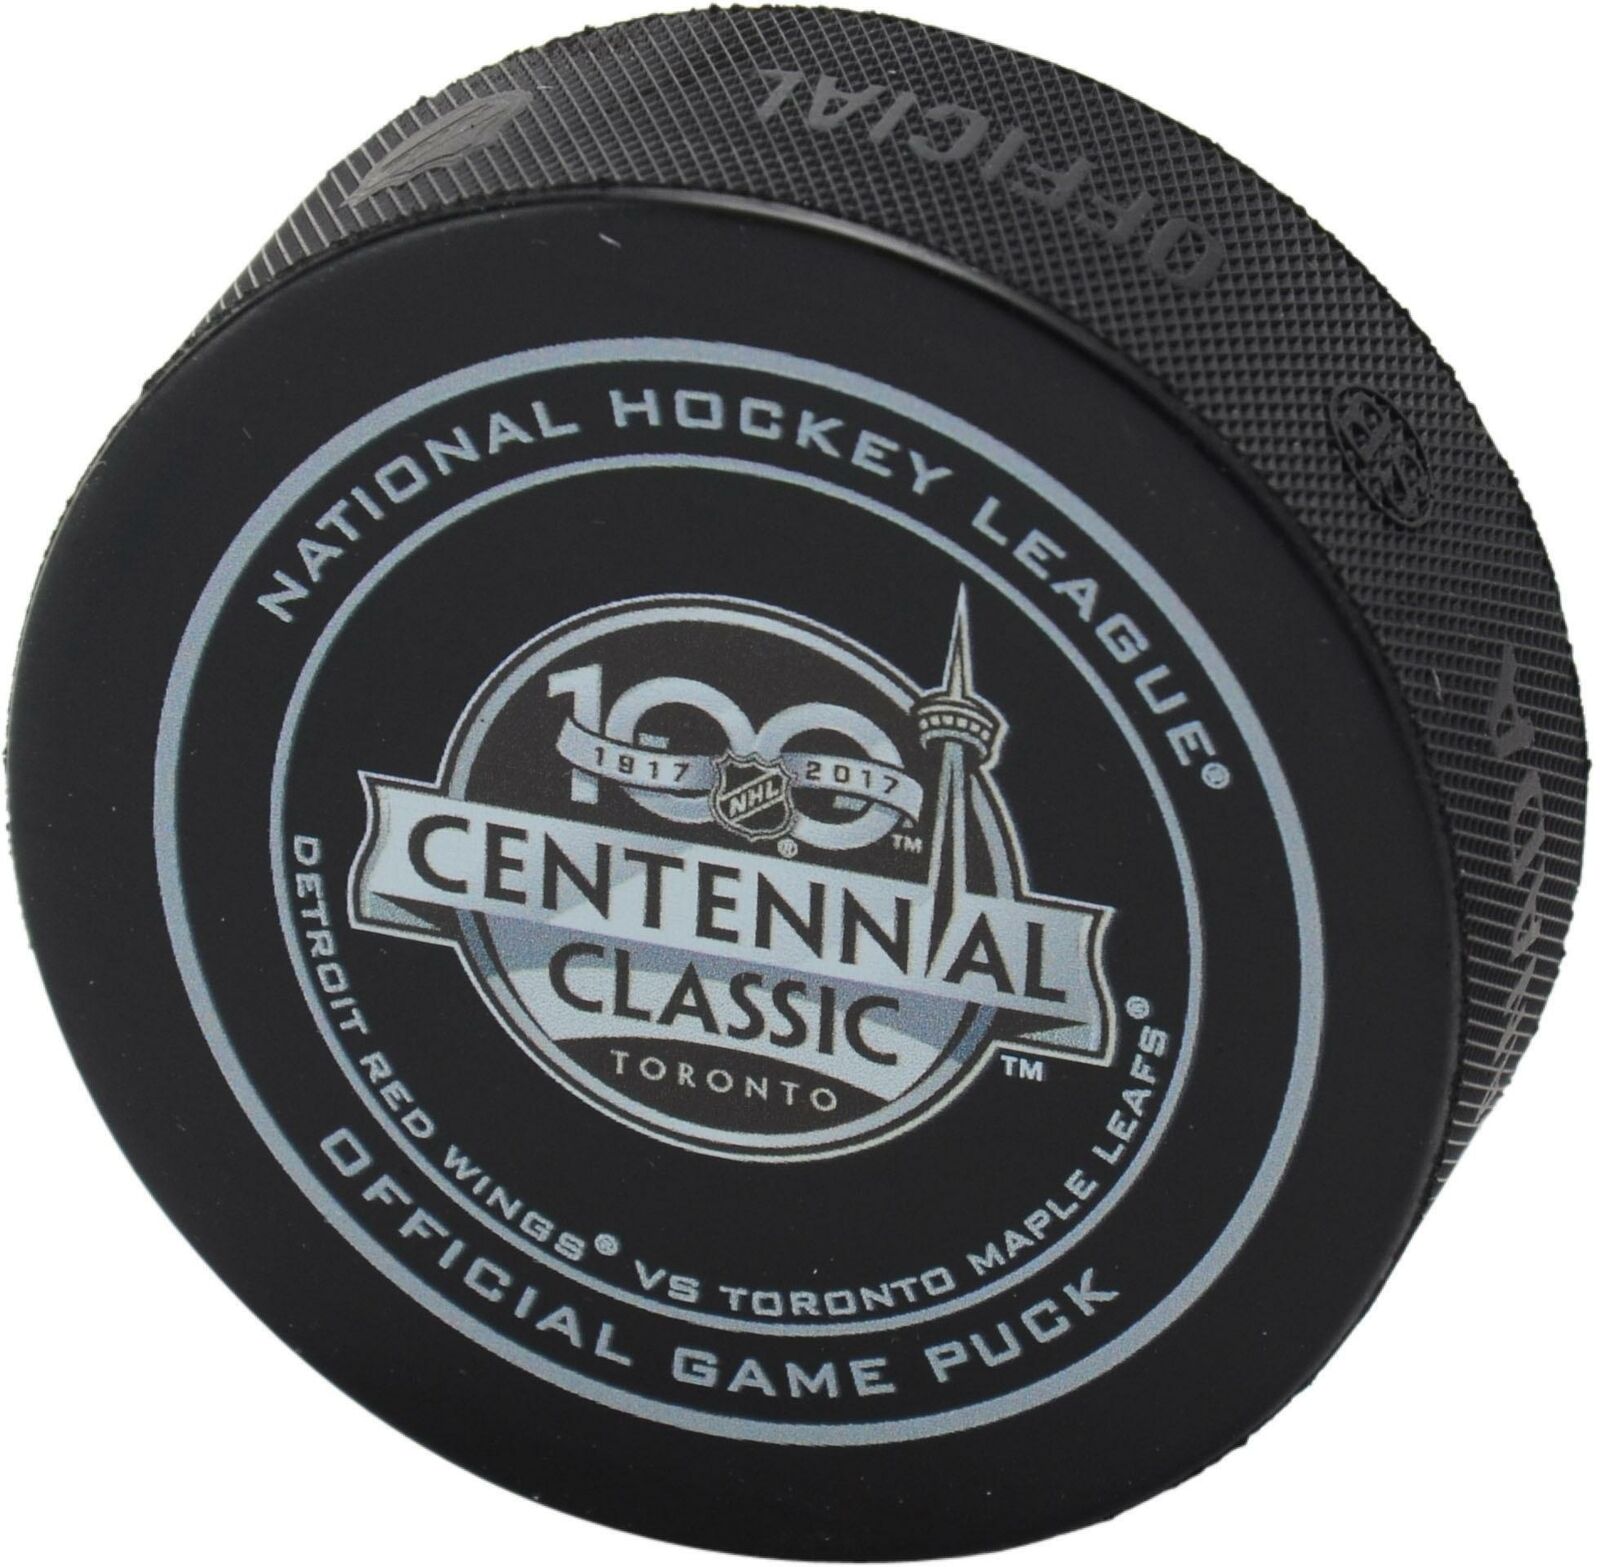 Detroit Red Wings vs Toronto Maple Leafs 2017 Centennial Classic Official Puck